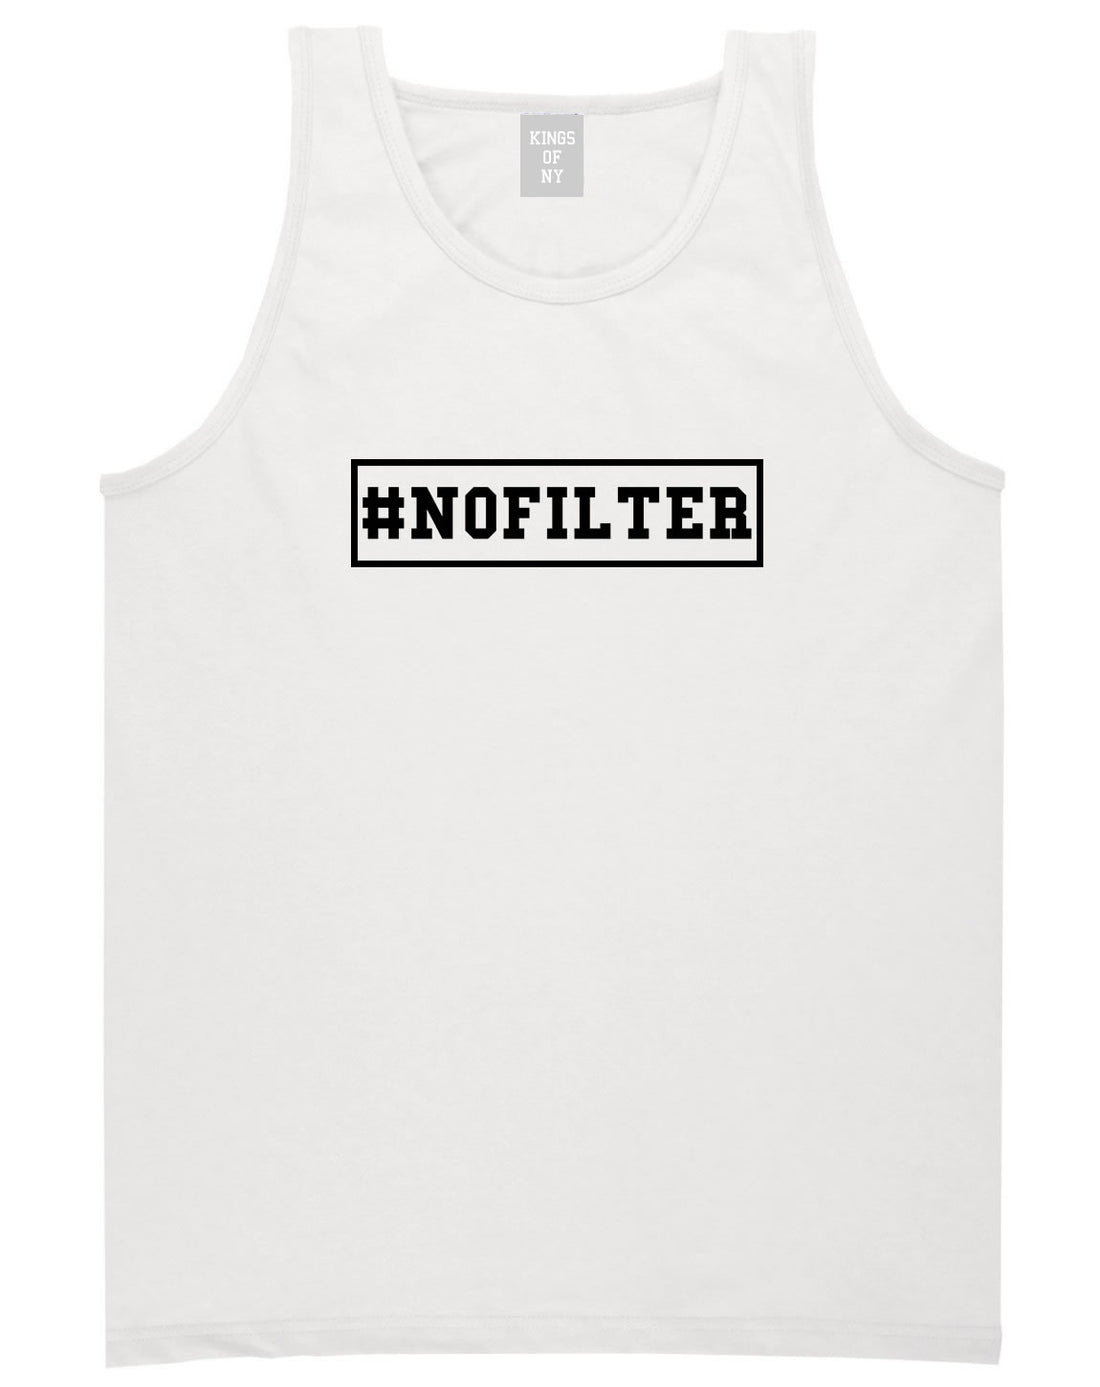 No Filter Selfie Tank Top in White By Kings Of NY